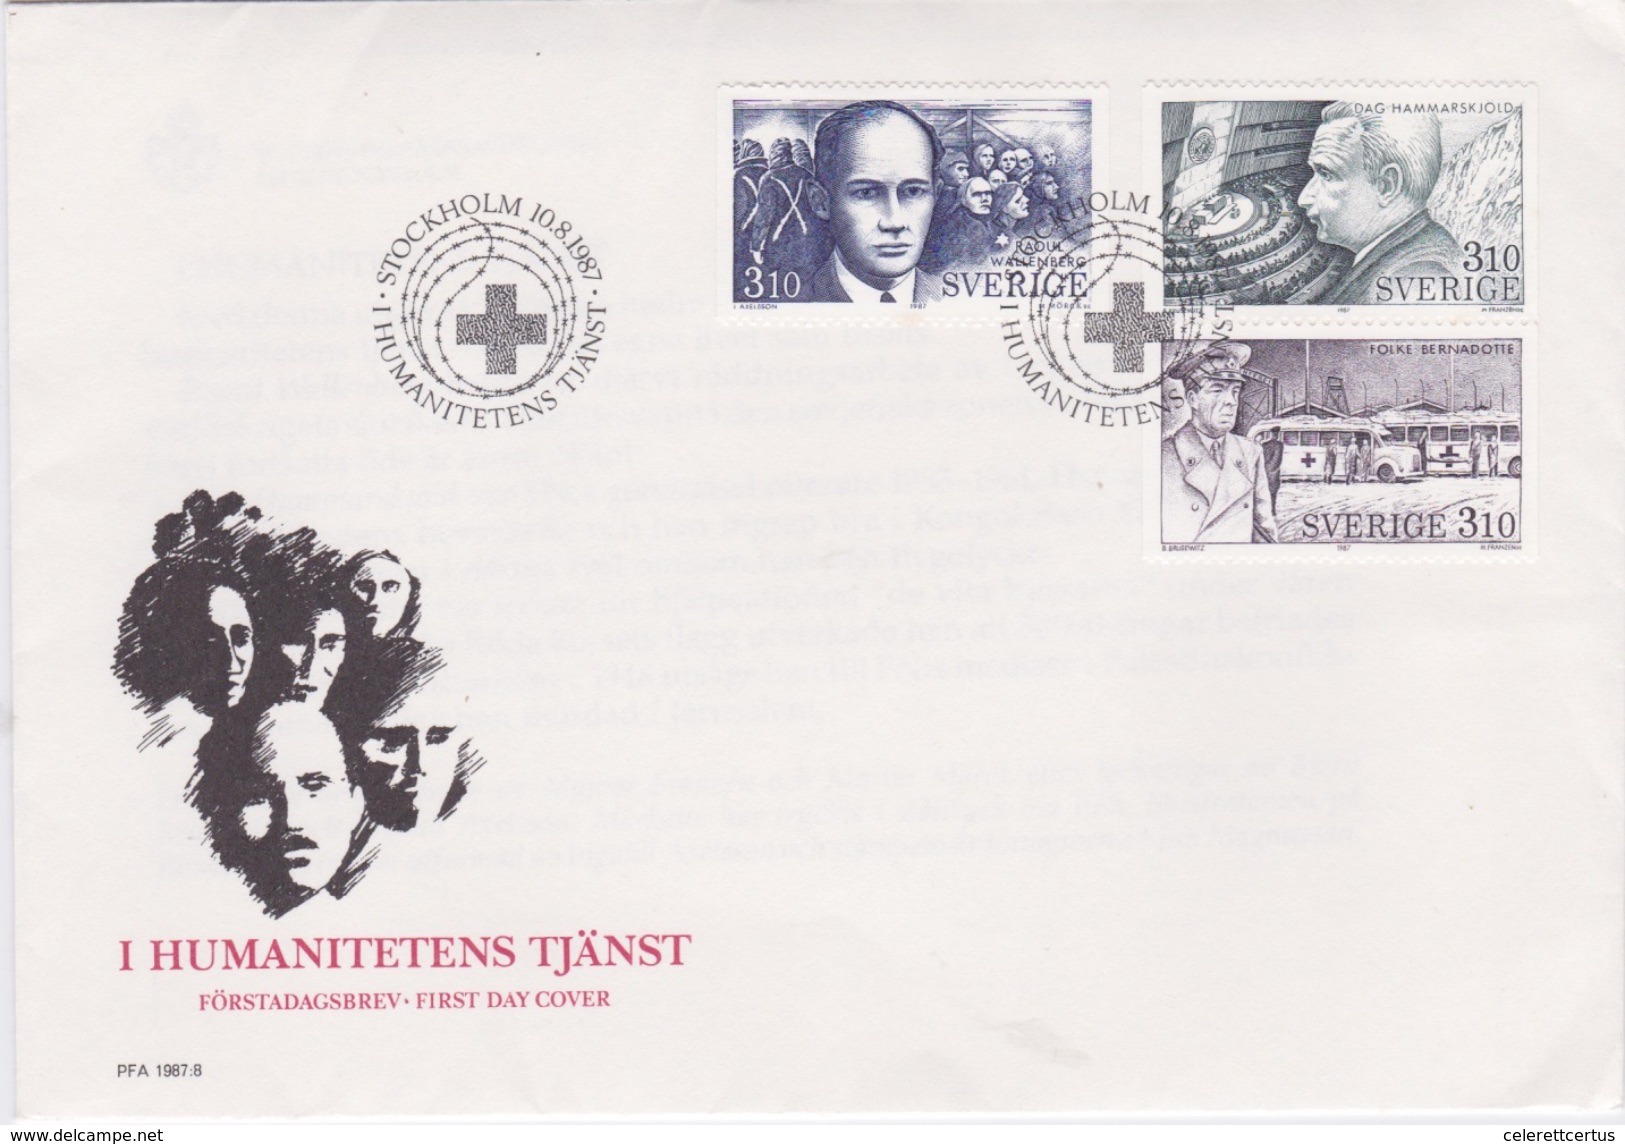 Sweden-1987 People With Humanity First Day Cover - FDC